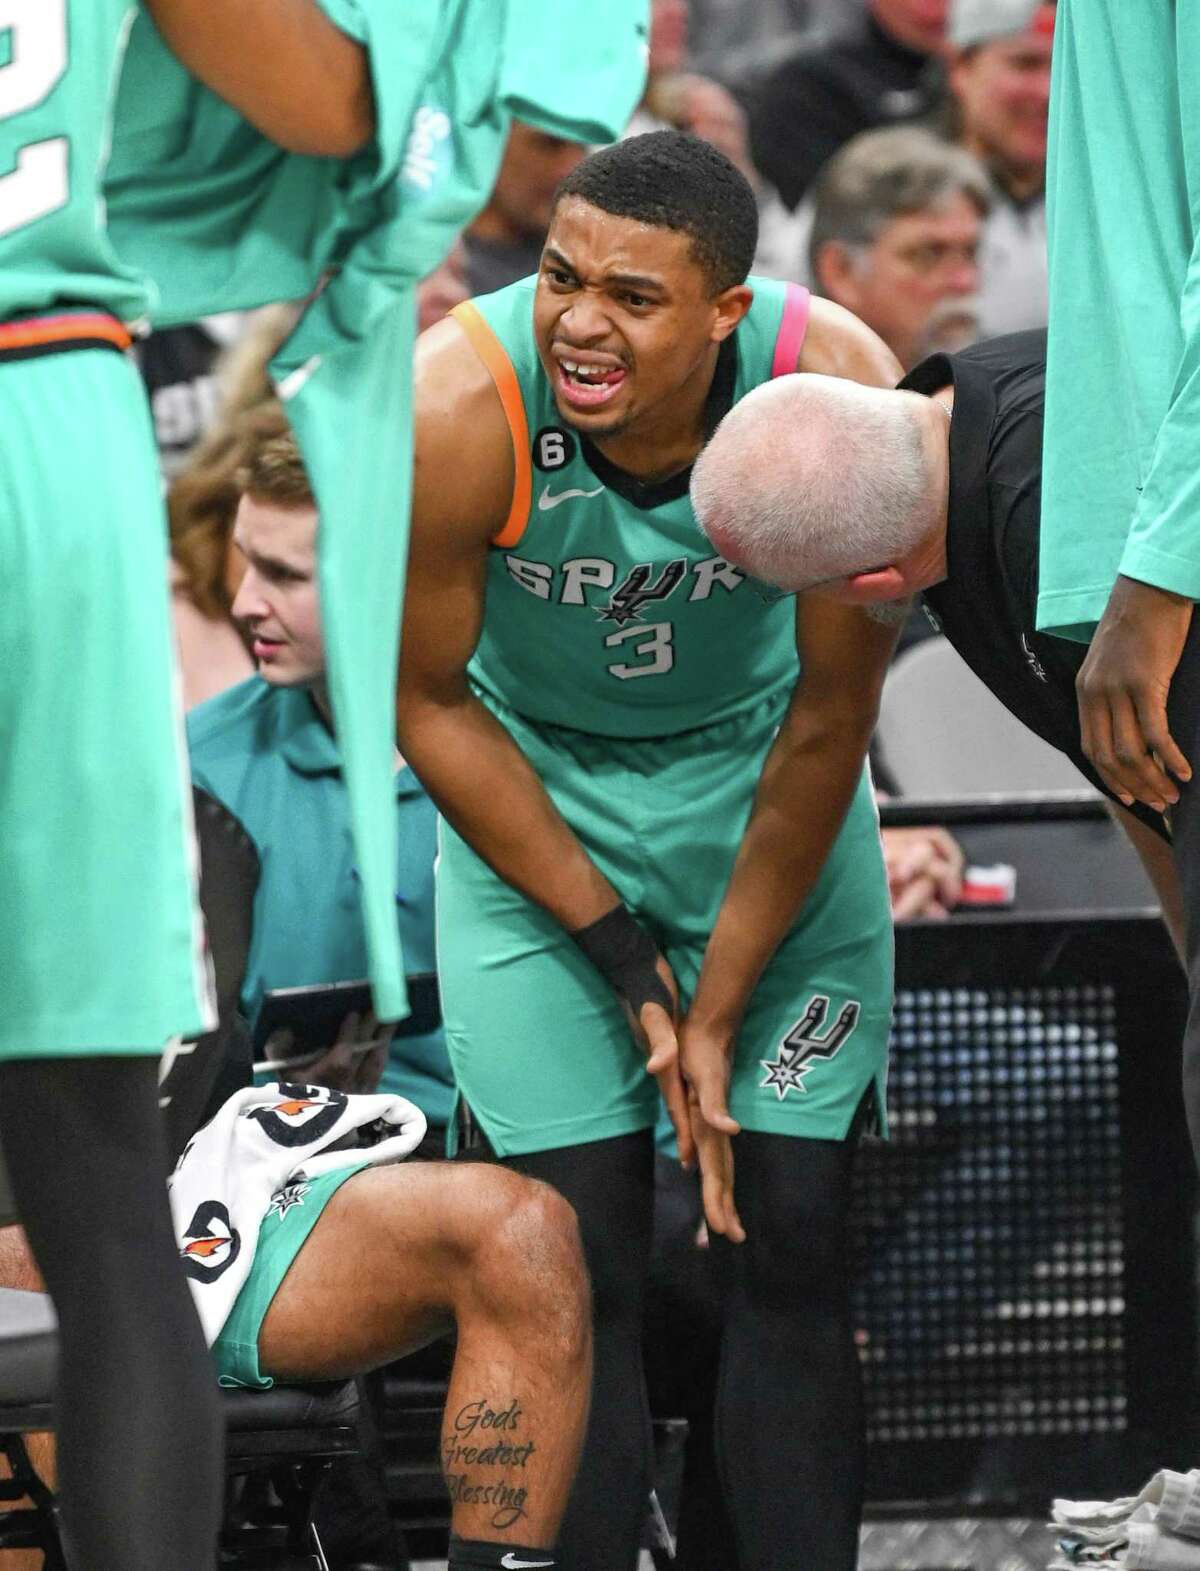 Keldon Johnson of the Spurs grimaces as he rubs his hands together after hurting one of them during NBA action against the Los Angeles Clippers in the AT&T Center on Friday, Jan. 20, 2023.